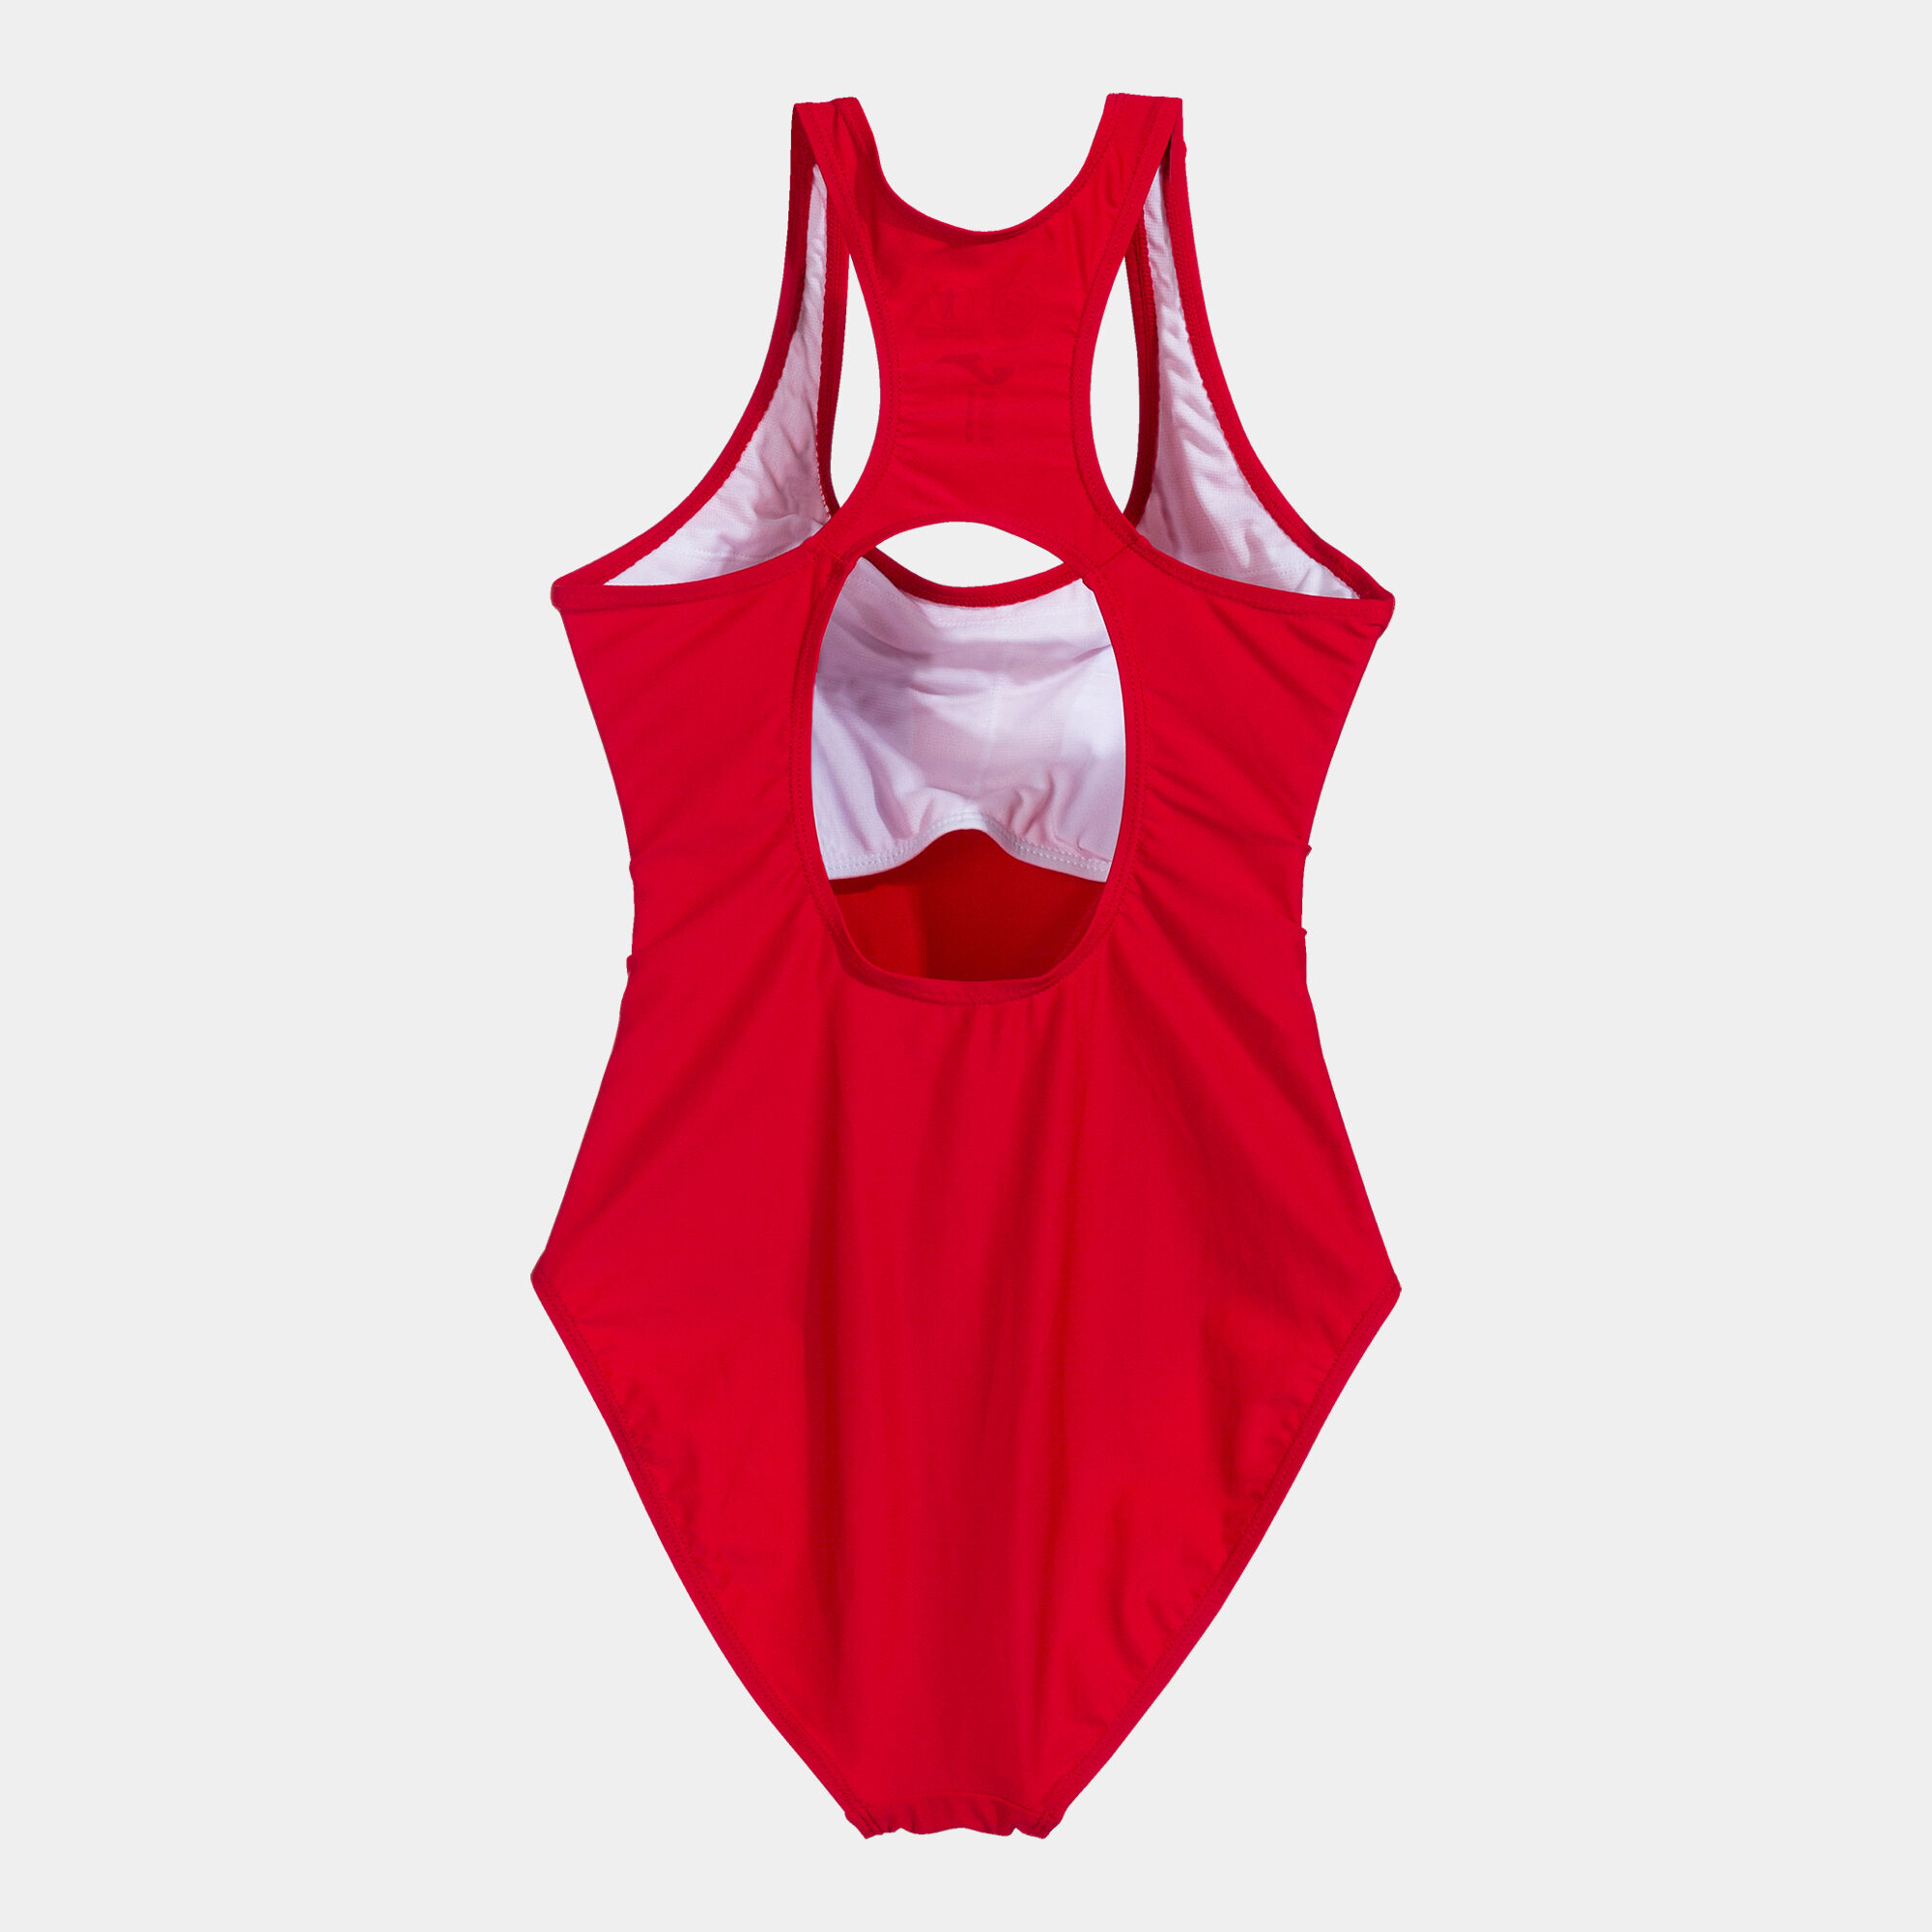 SWIMSUIT WOMAN SHARK RED